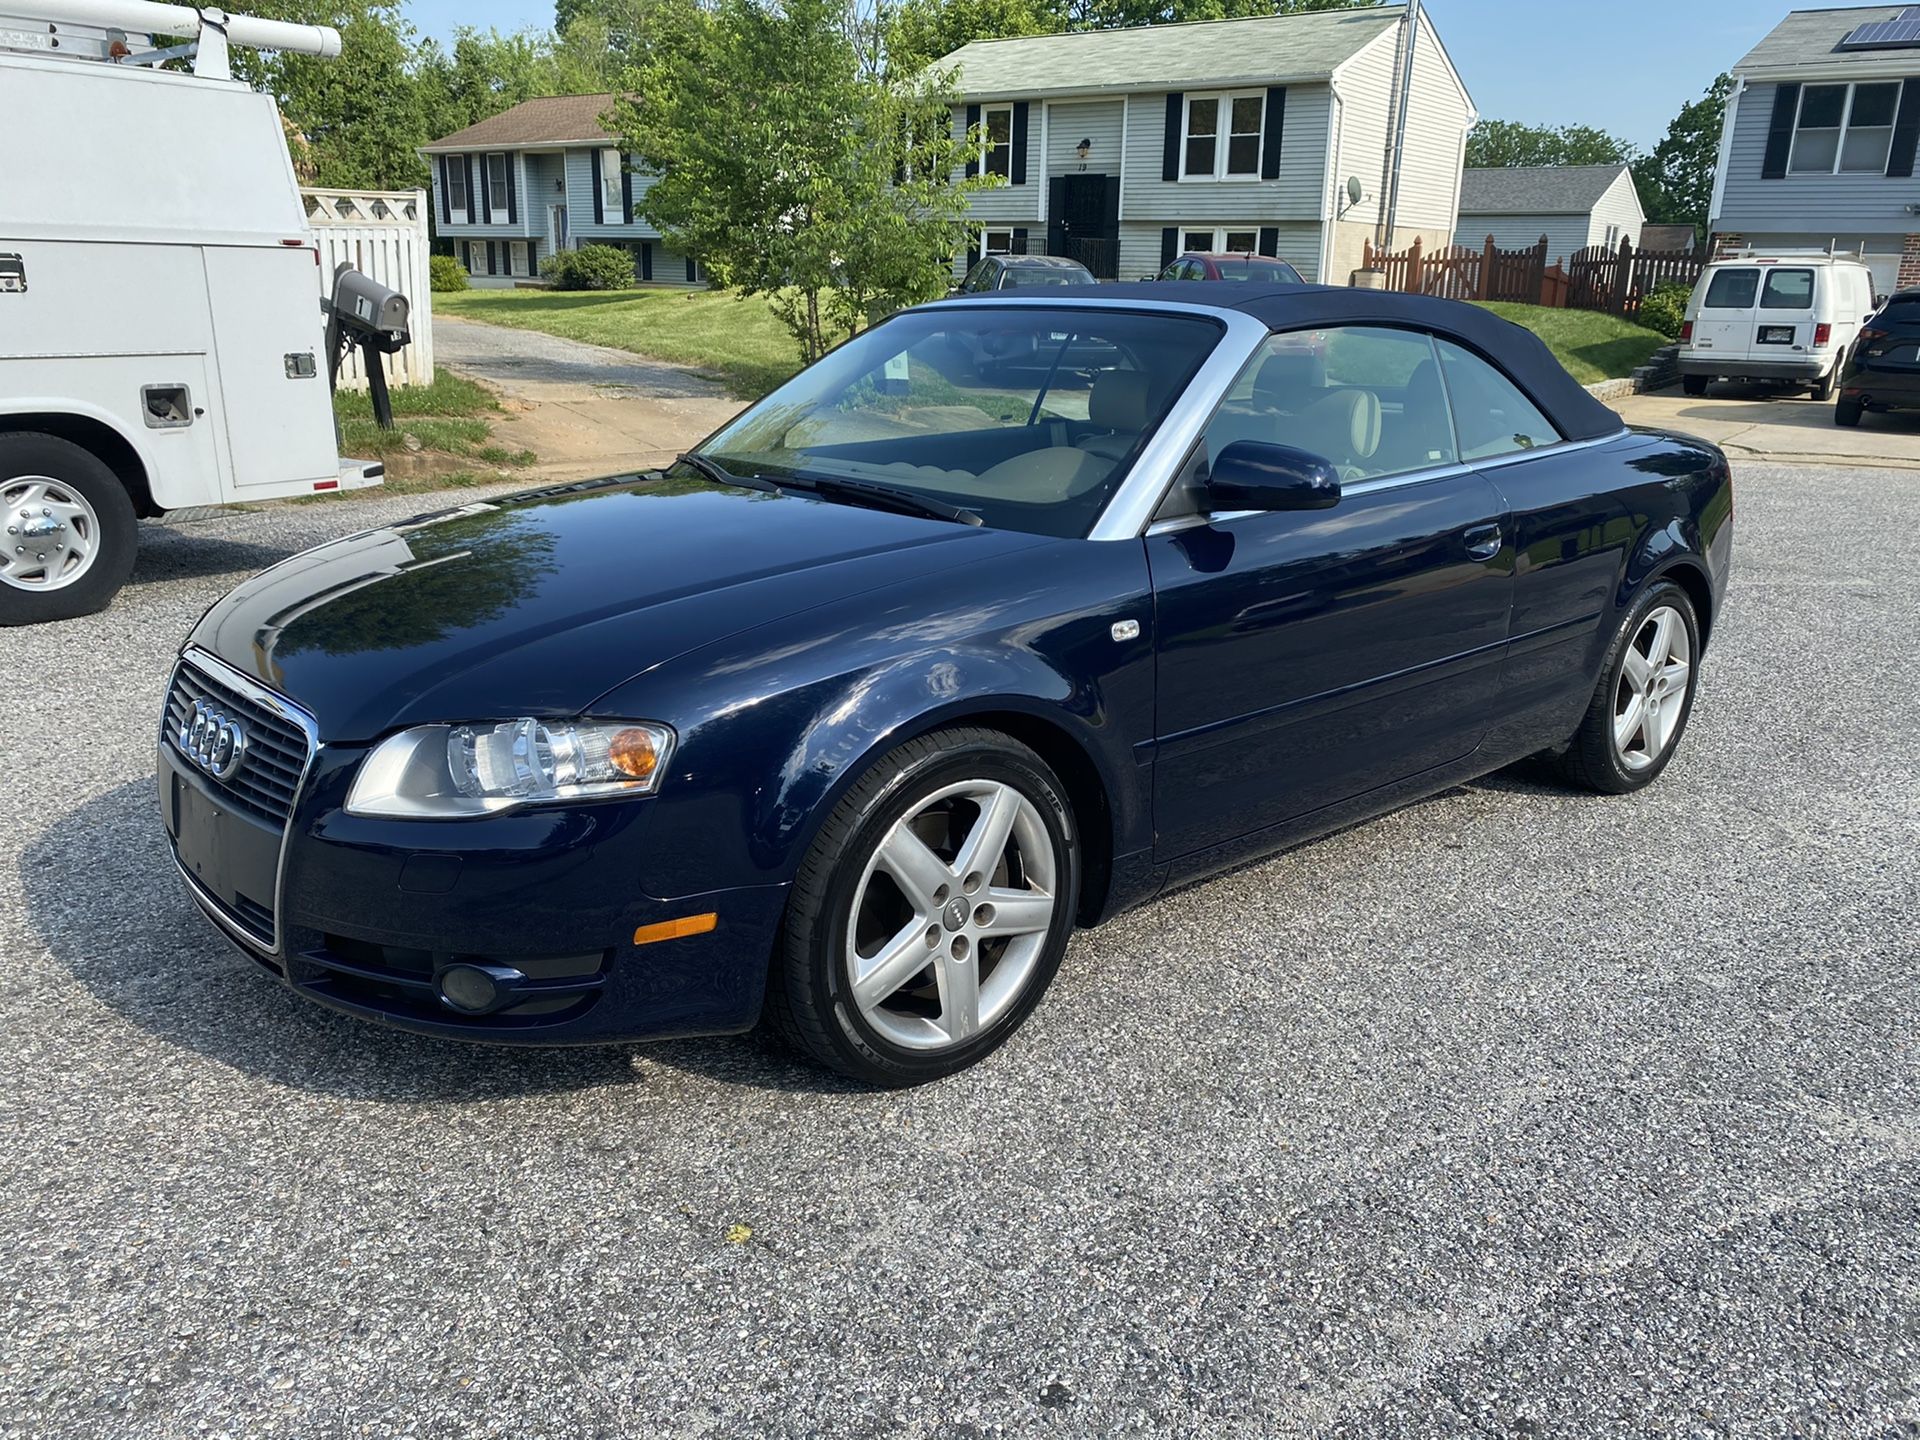 08 AUDI DROP TOP CONVERTIBLE / ABSOLUTELY NO ISSUES / ASKING BEST OFFER